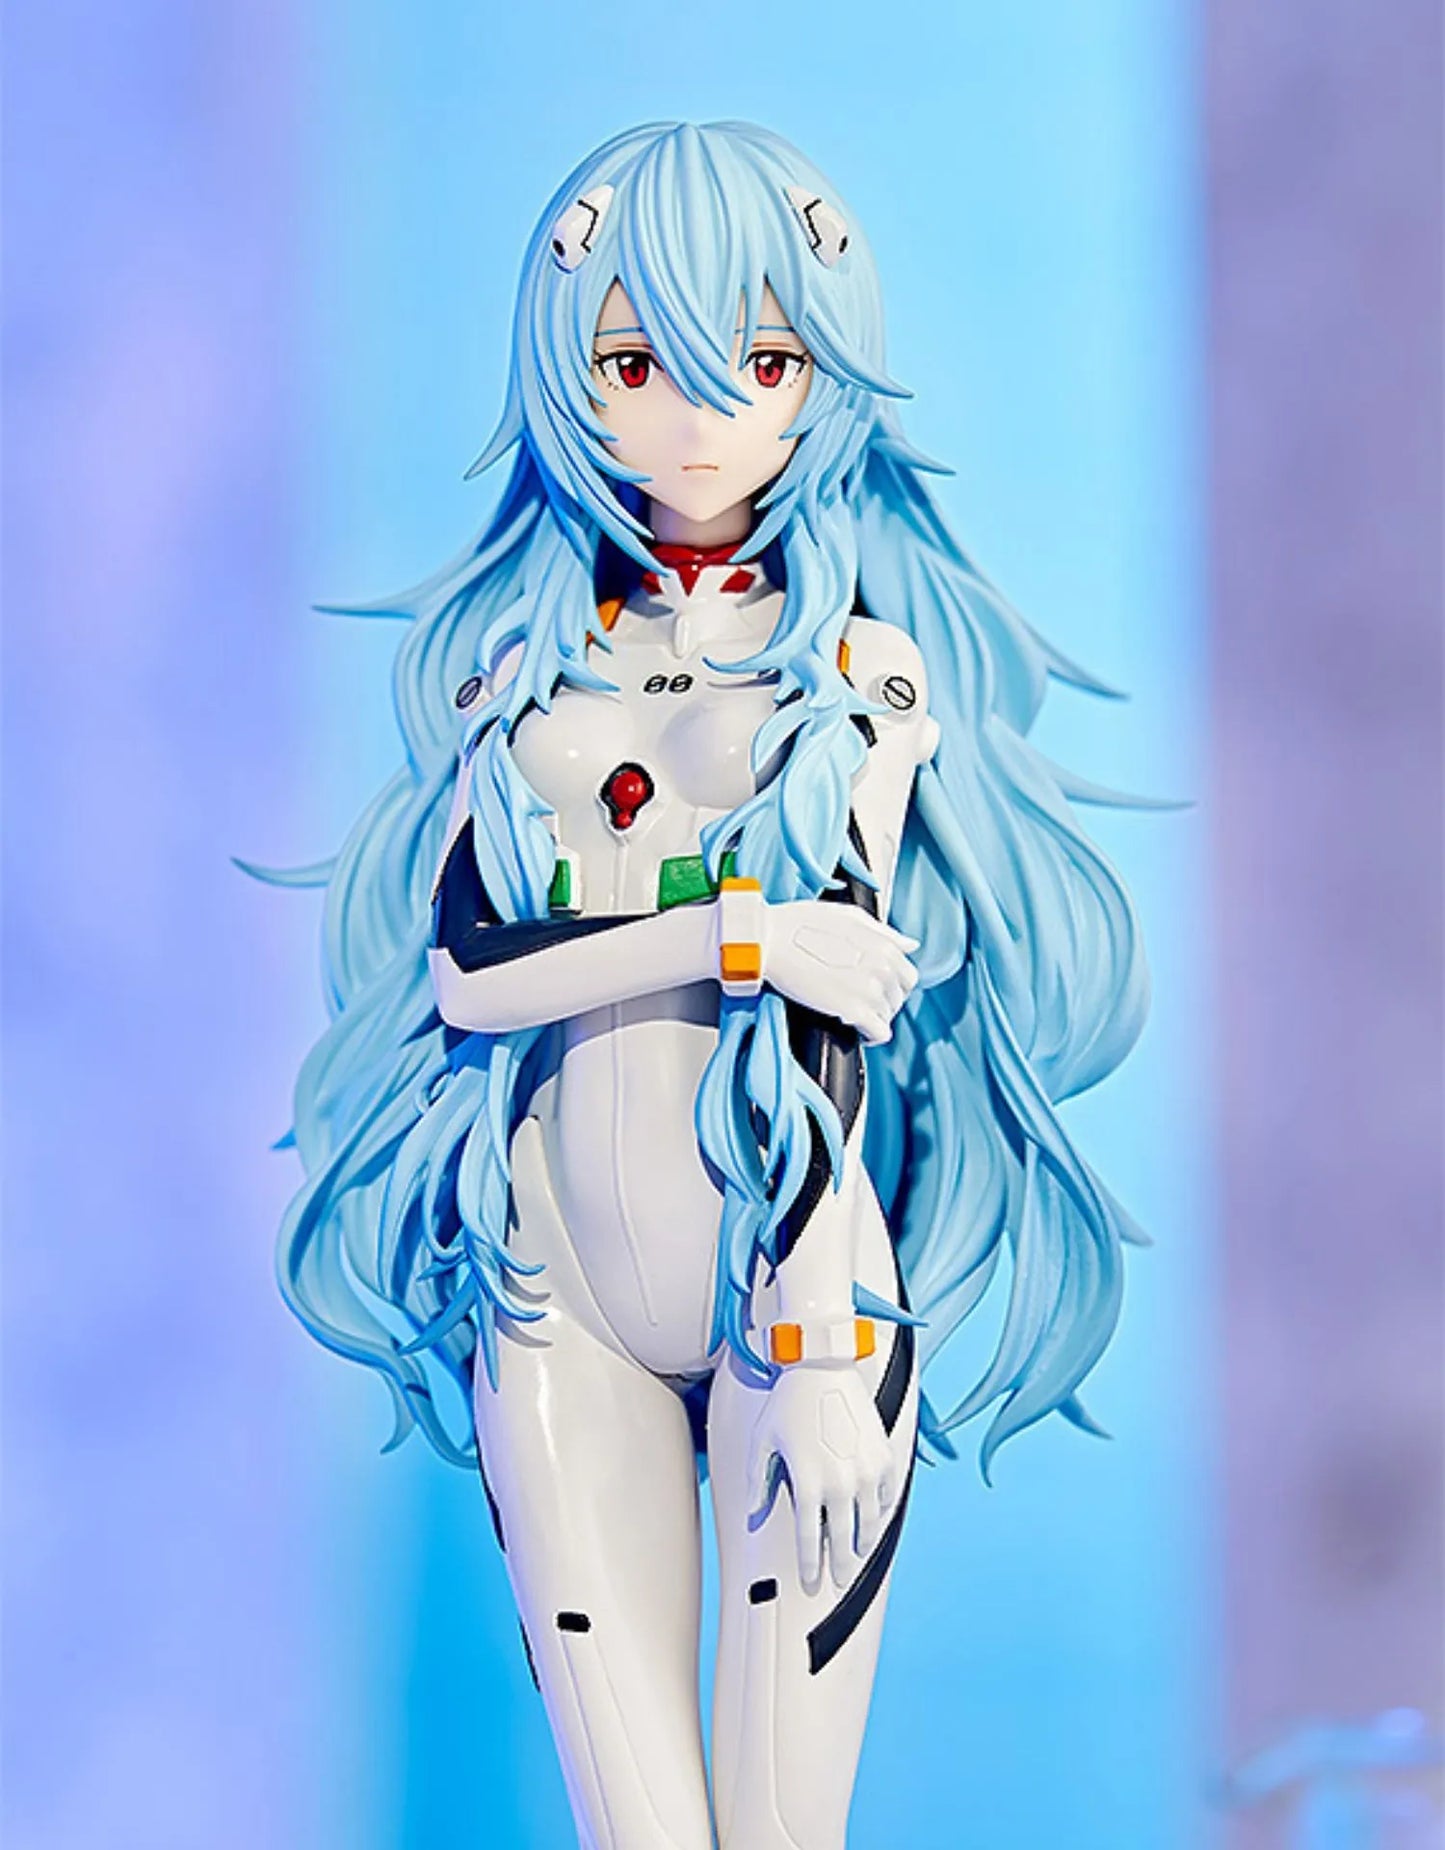 Neon Genesis Evangelion: Ayanami Rei Collector's Edition PVC Figure – The Blue-Haired Enigma